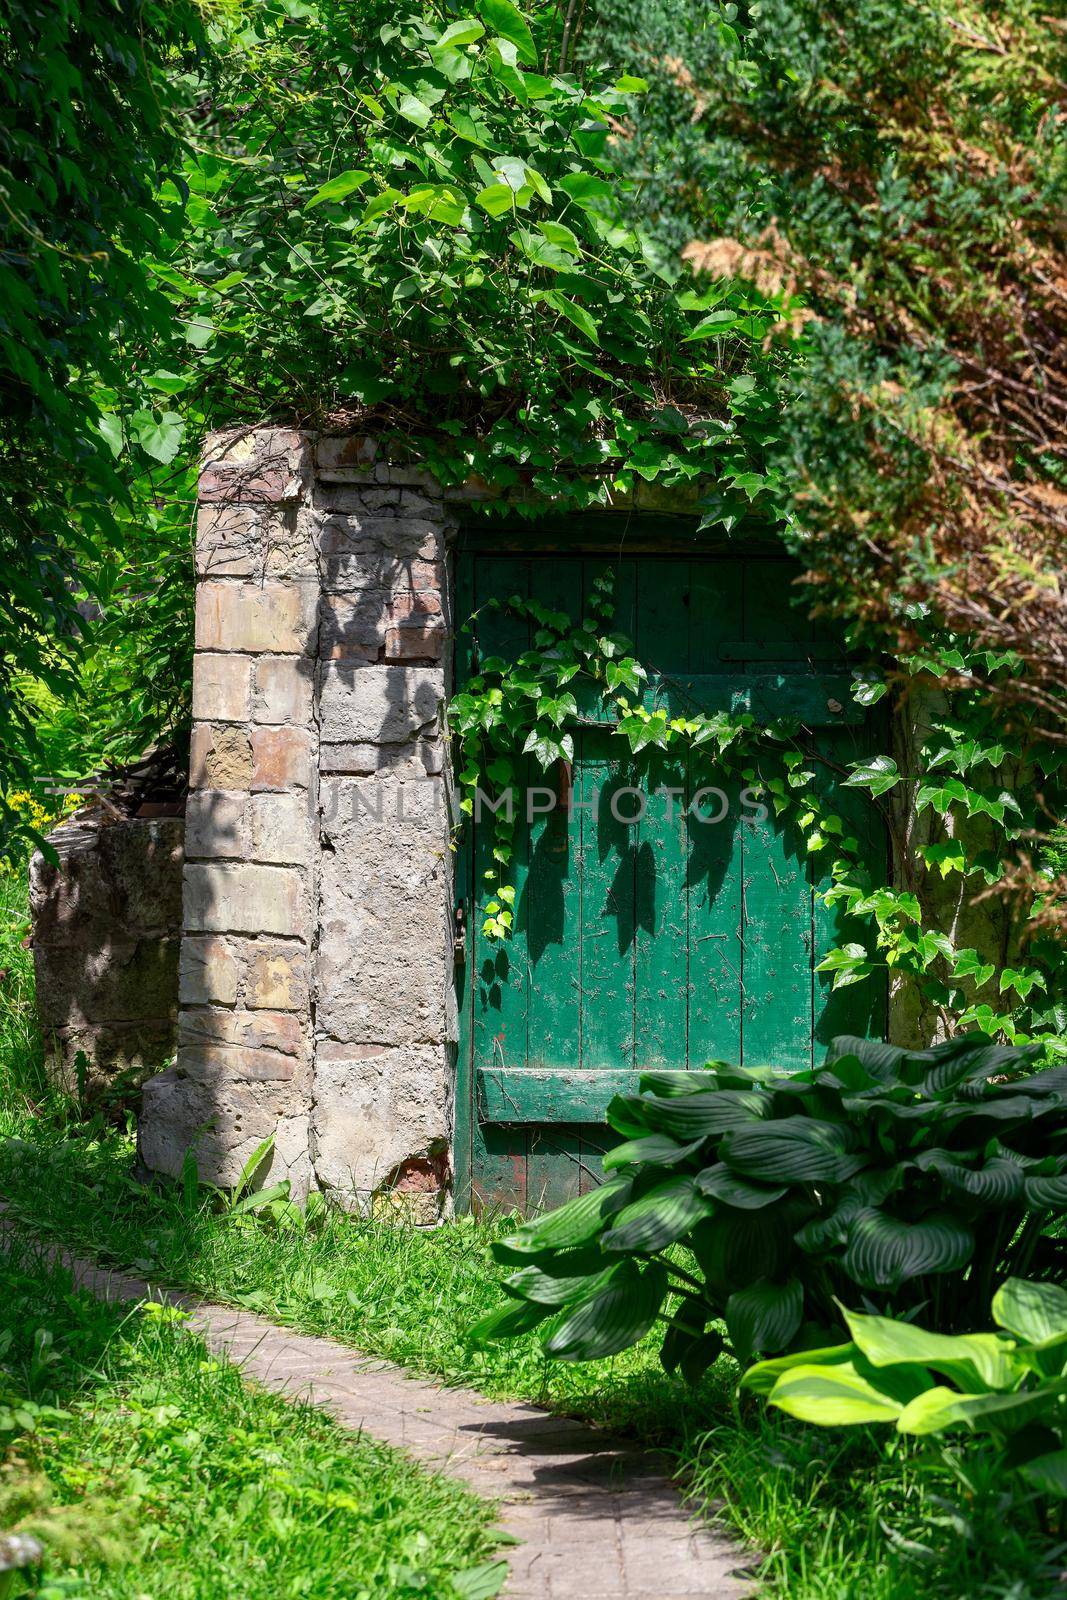 The door of an old wine cellar with a vine